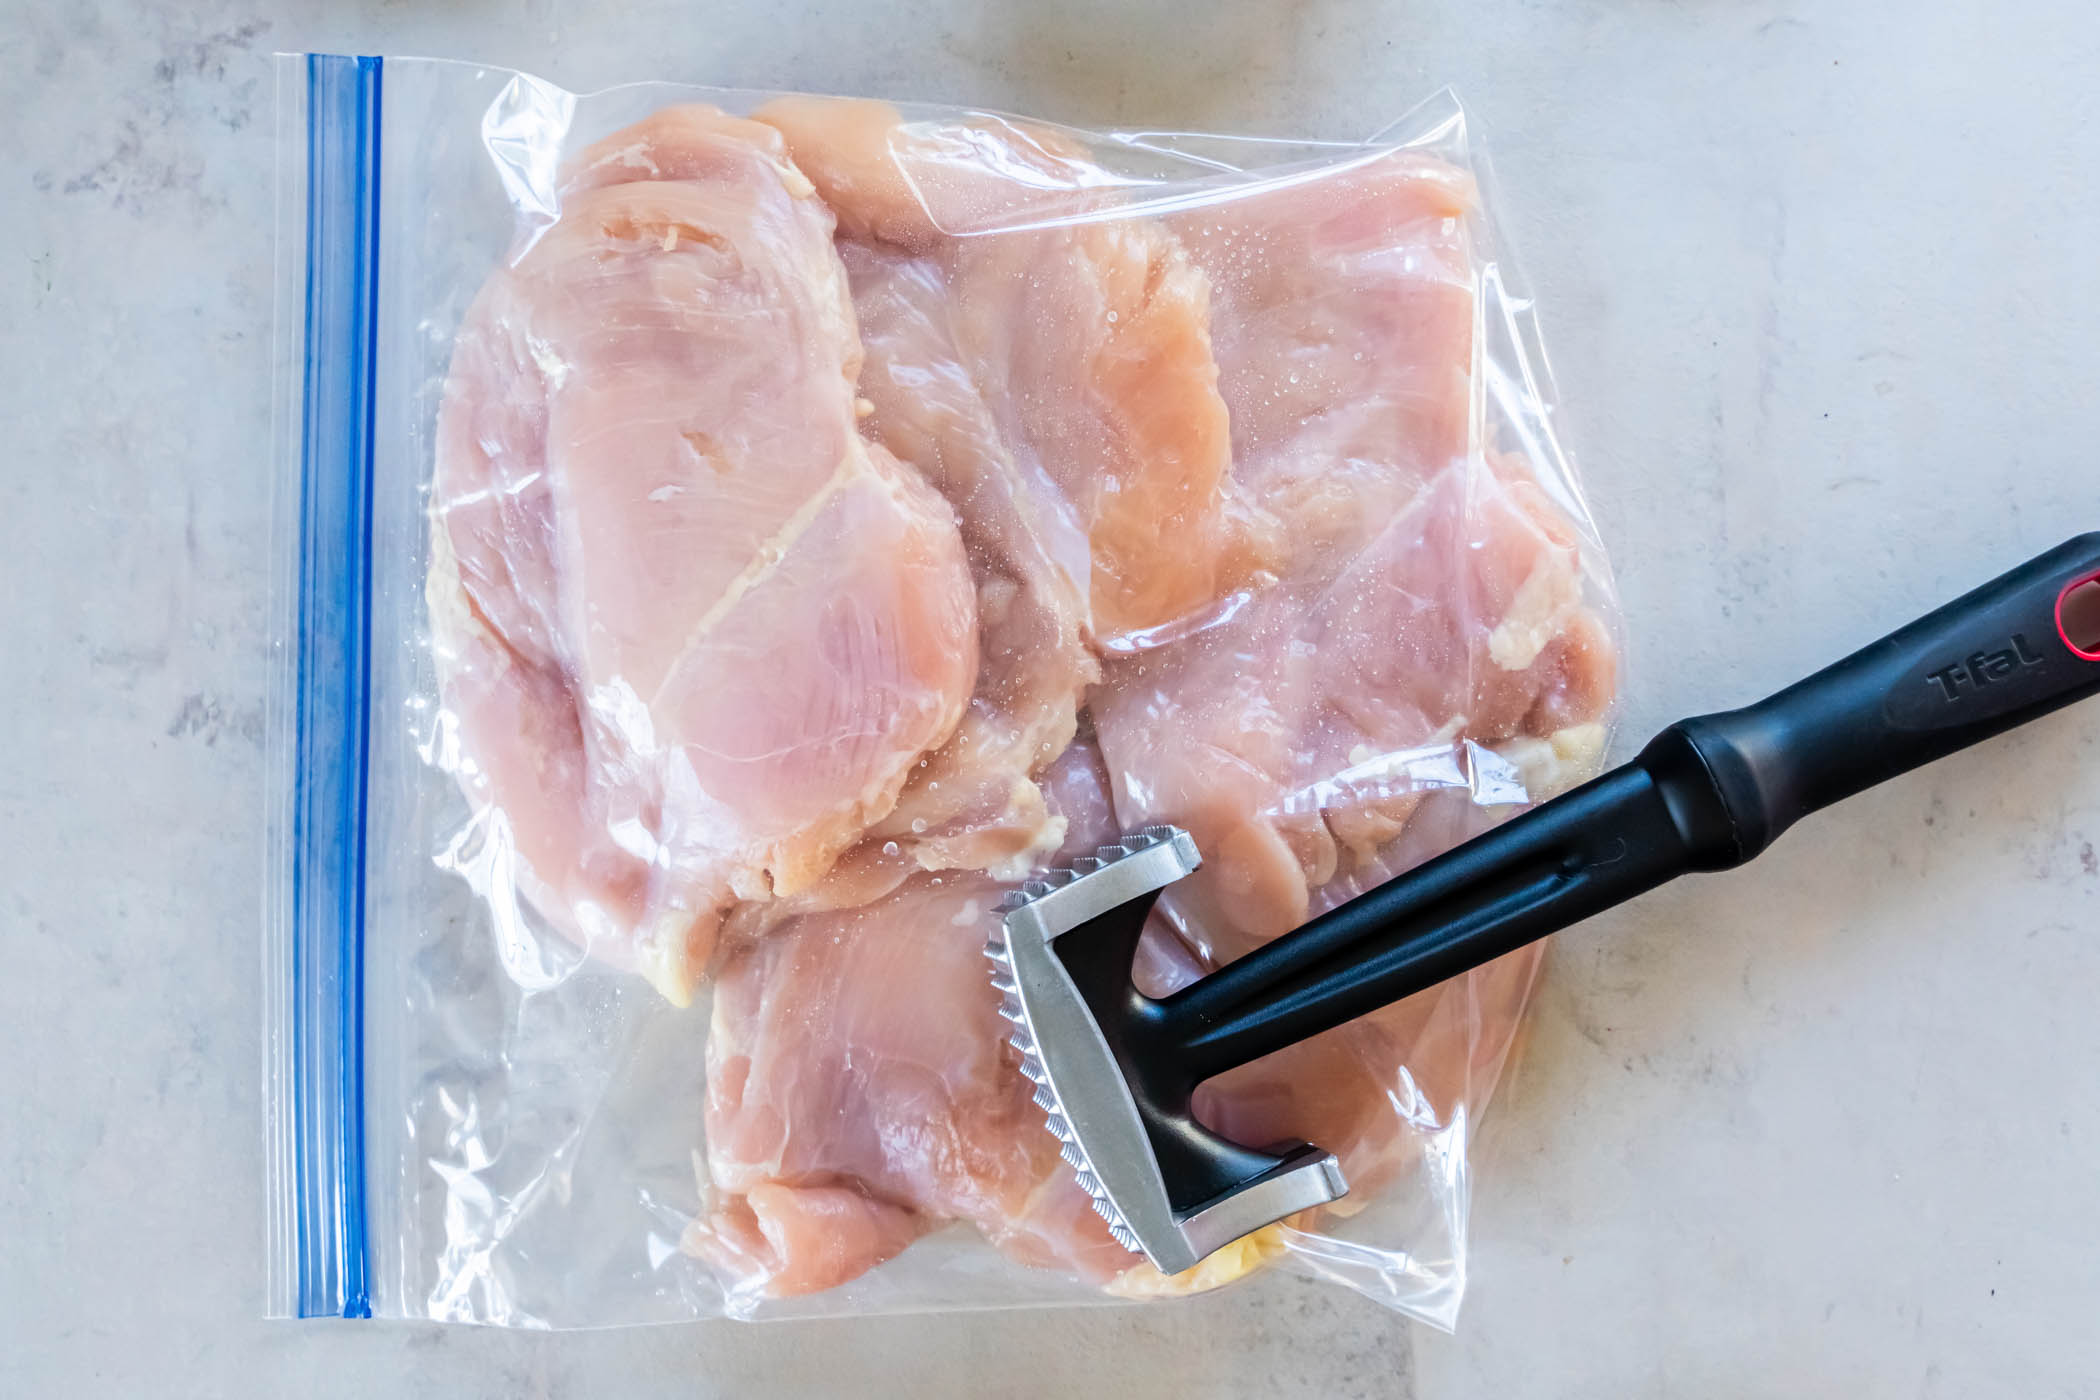 Four raw chicken breasts in zip-top plastic bag with meat mallet resting on bag.